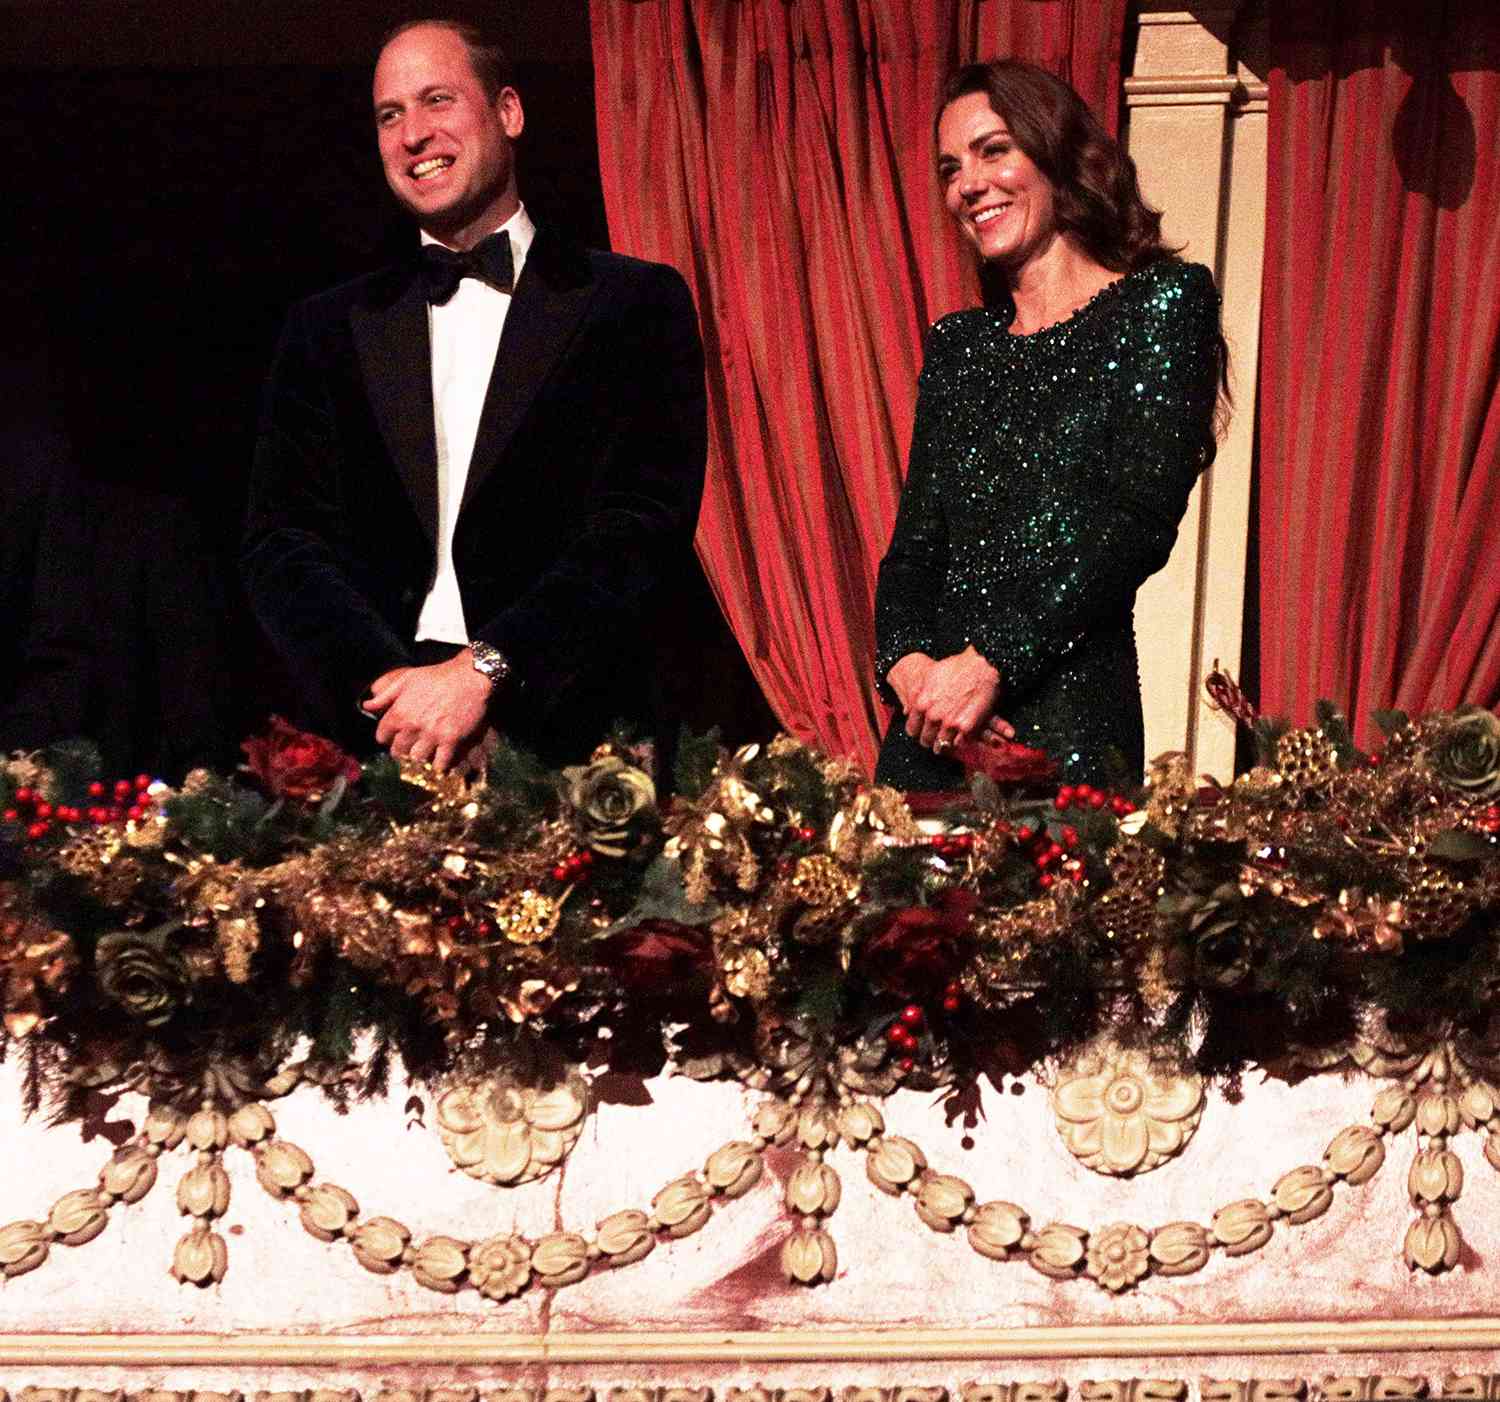 Prince William and Kate Middleton Sparkle and Smile Ahead of Sunday's Royal Variety Performance Airing